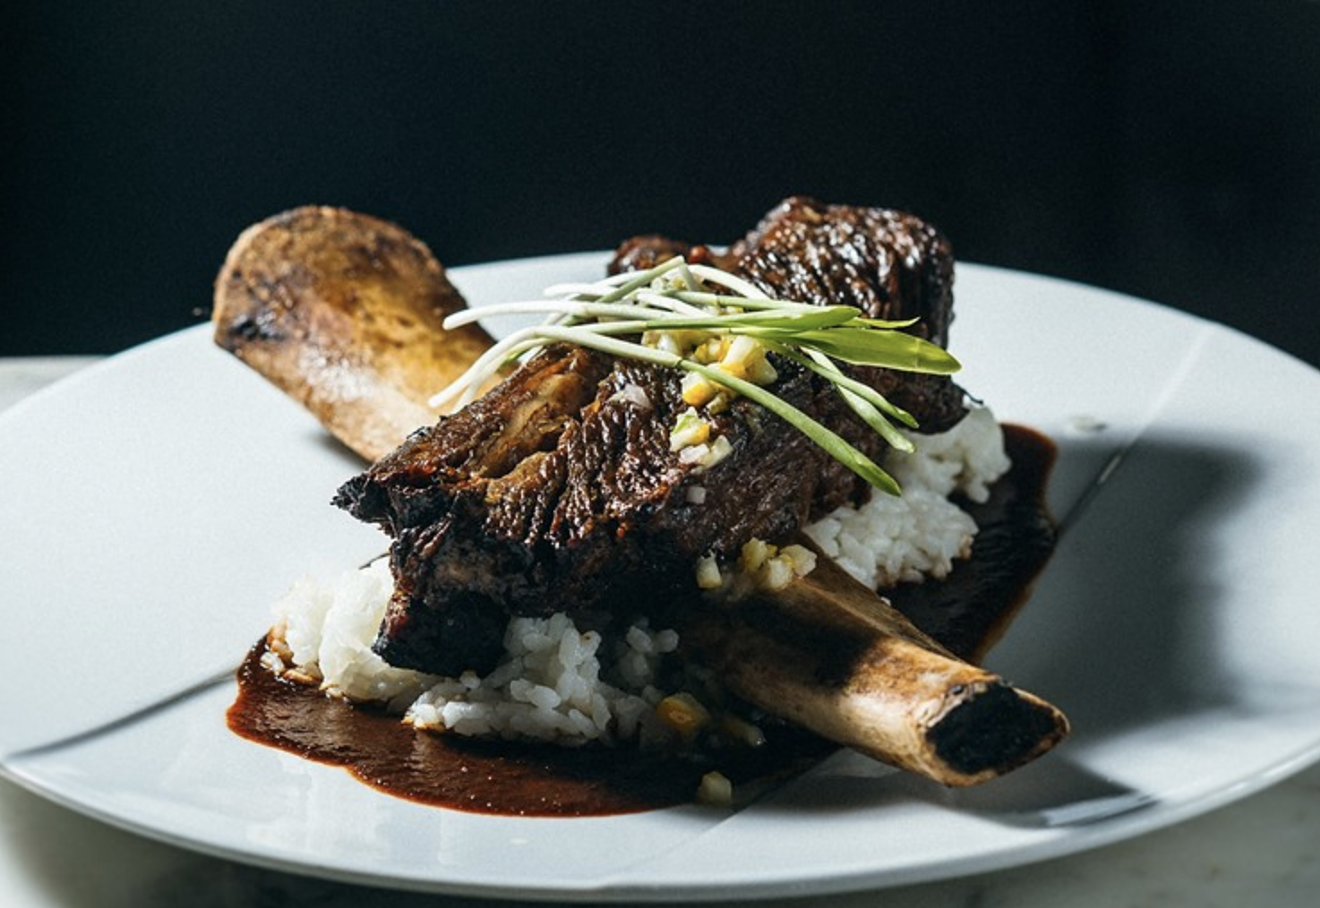 Previously Tulum's braised short rib was on the menu for Restaurant Week.